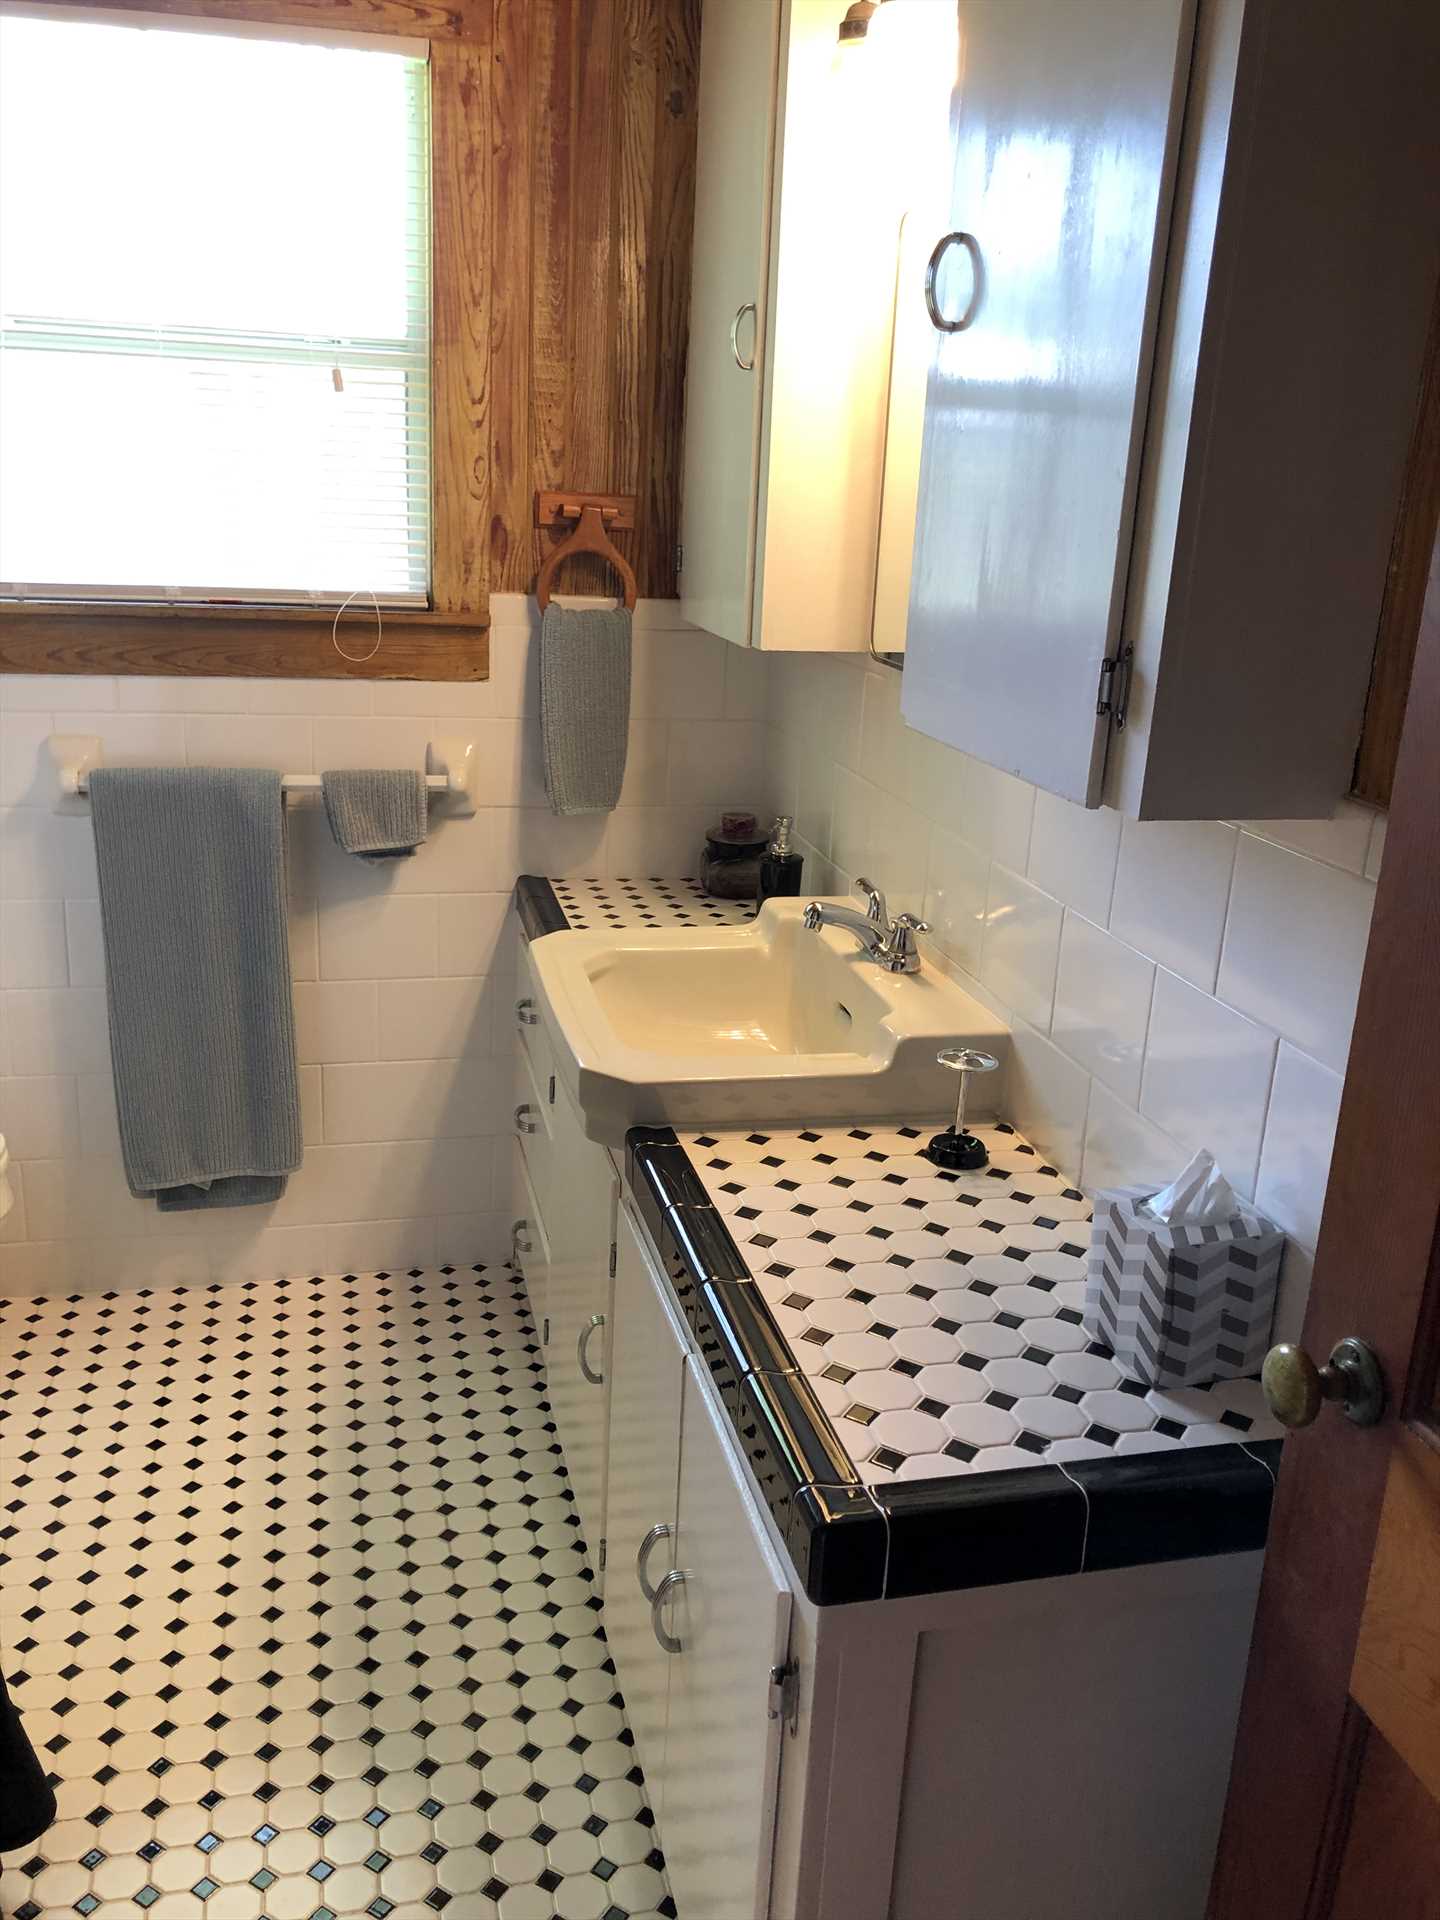                                                 The clean full bathroom features a shower and tub combo-and all the bathroom linens you'll need for your visit.